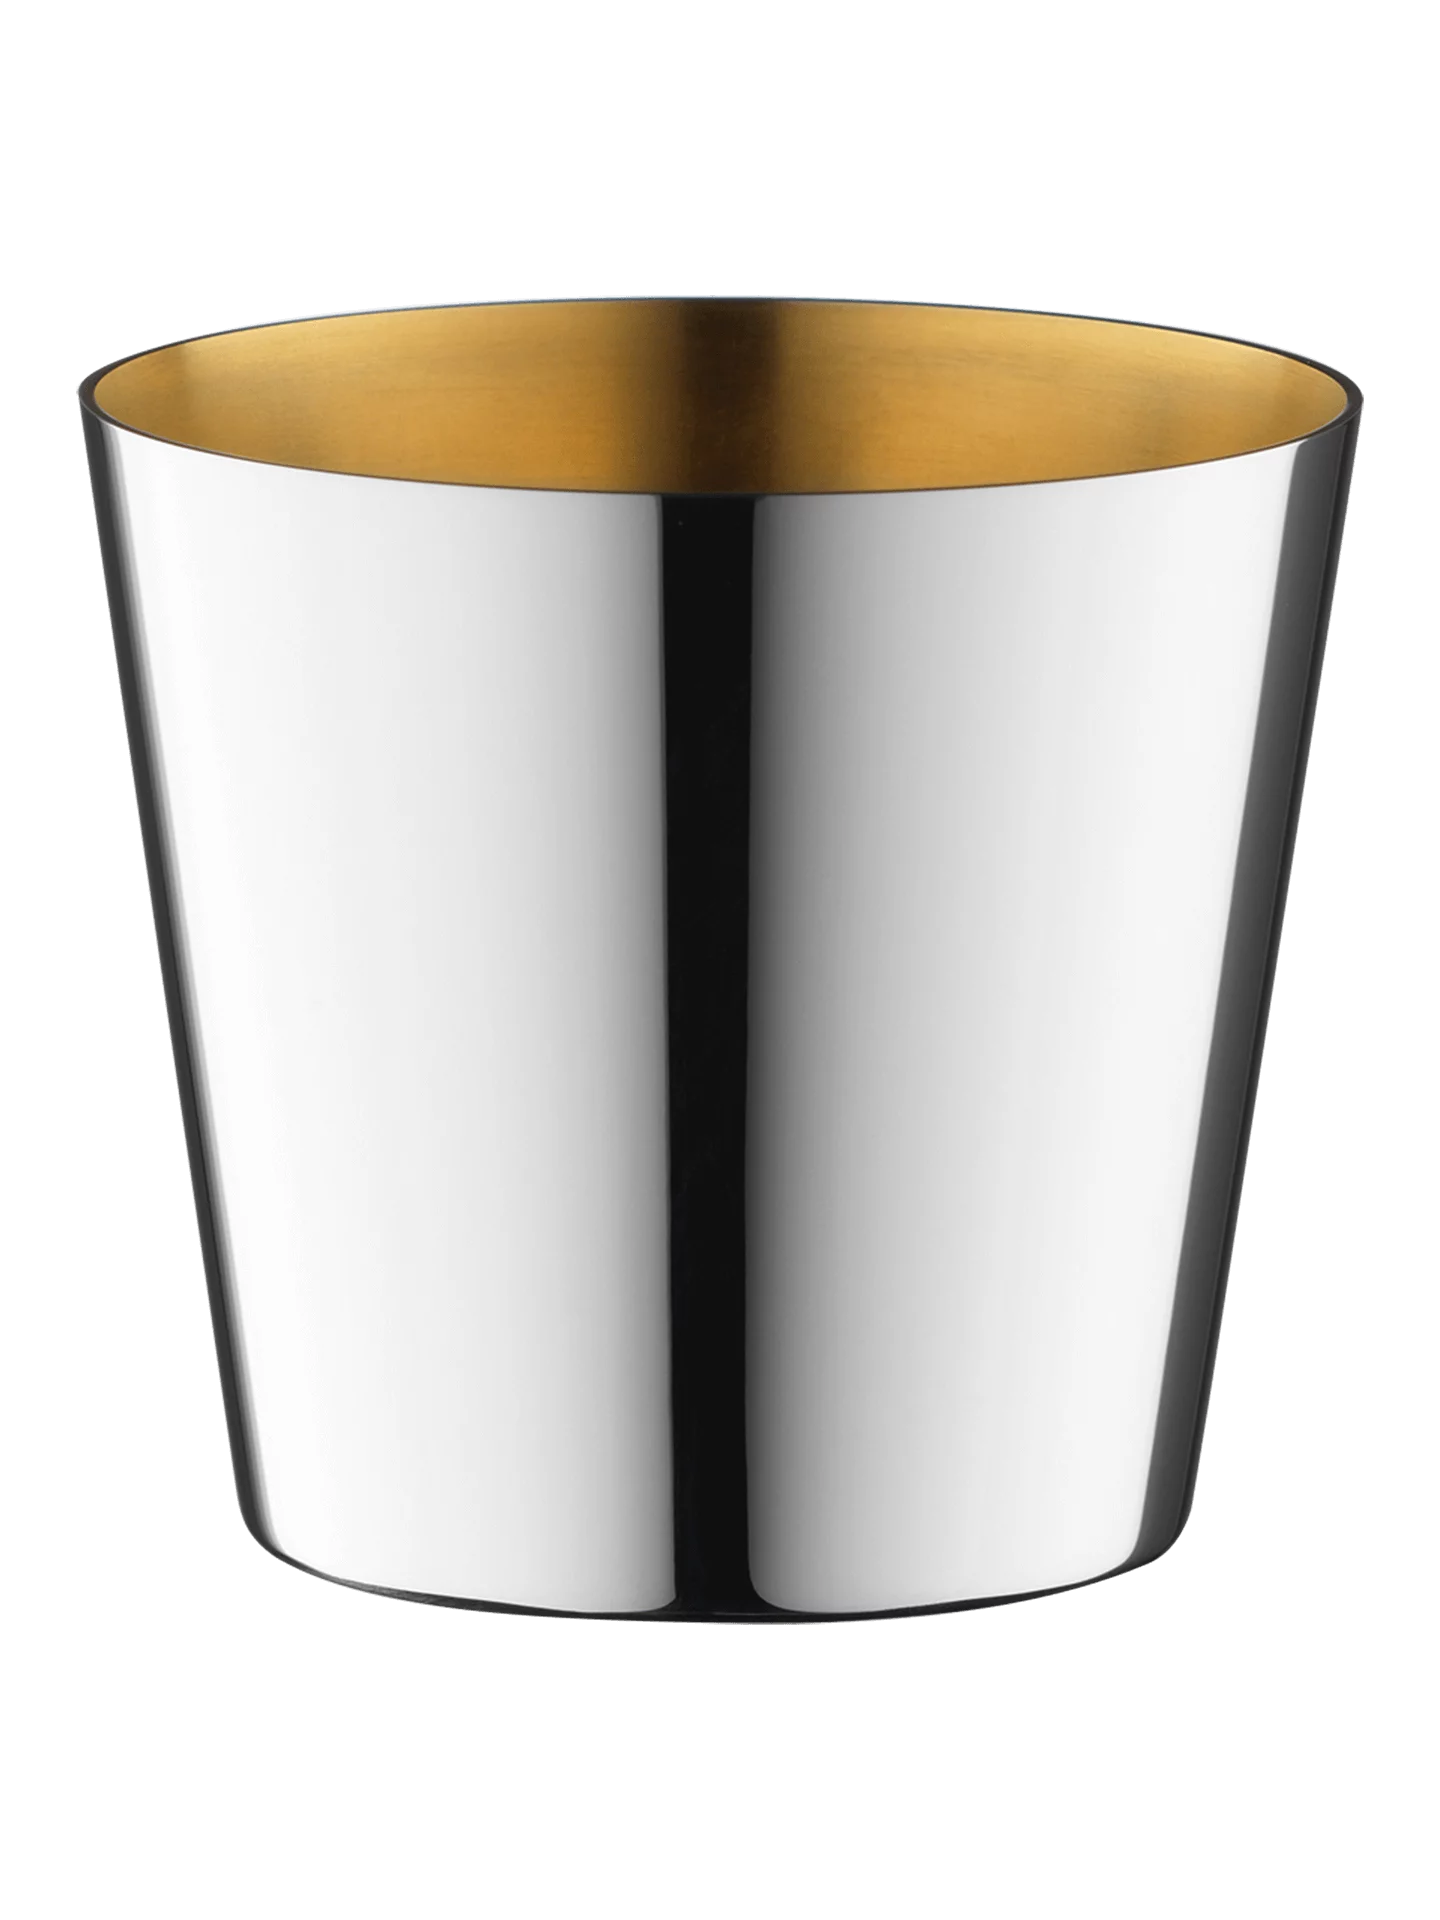 Dante Rum and distillate tumbler, inside gold (90g silverplated, gold-plated inside)